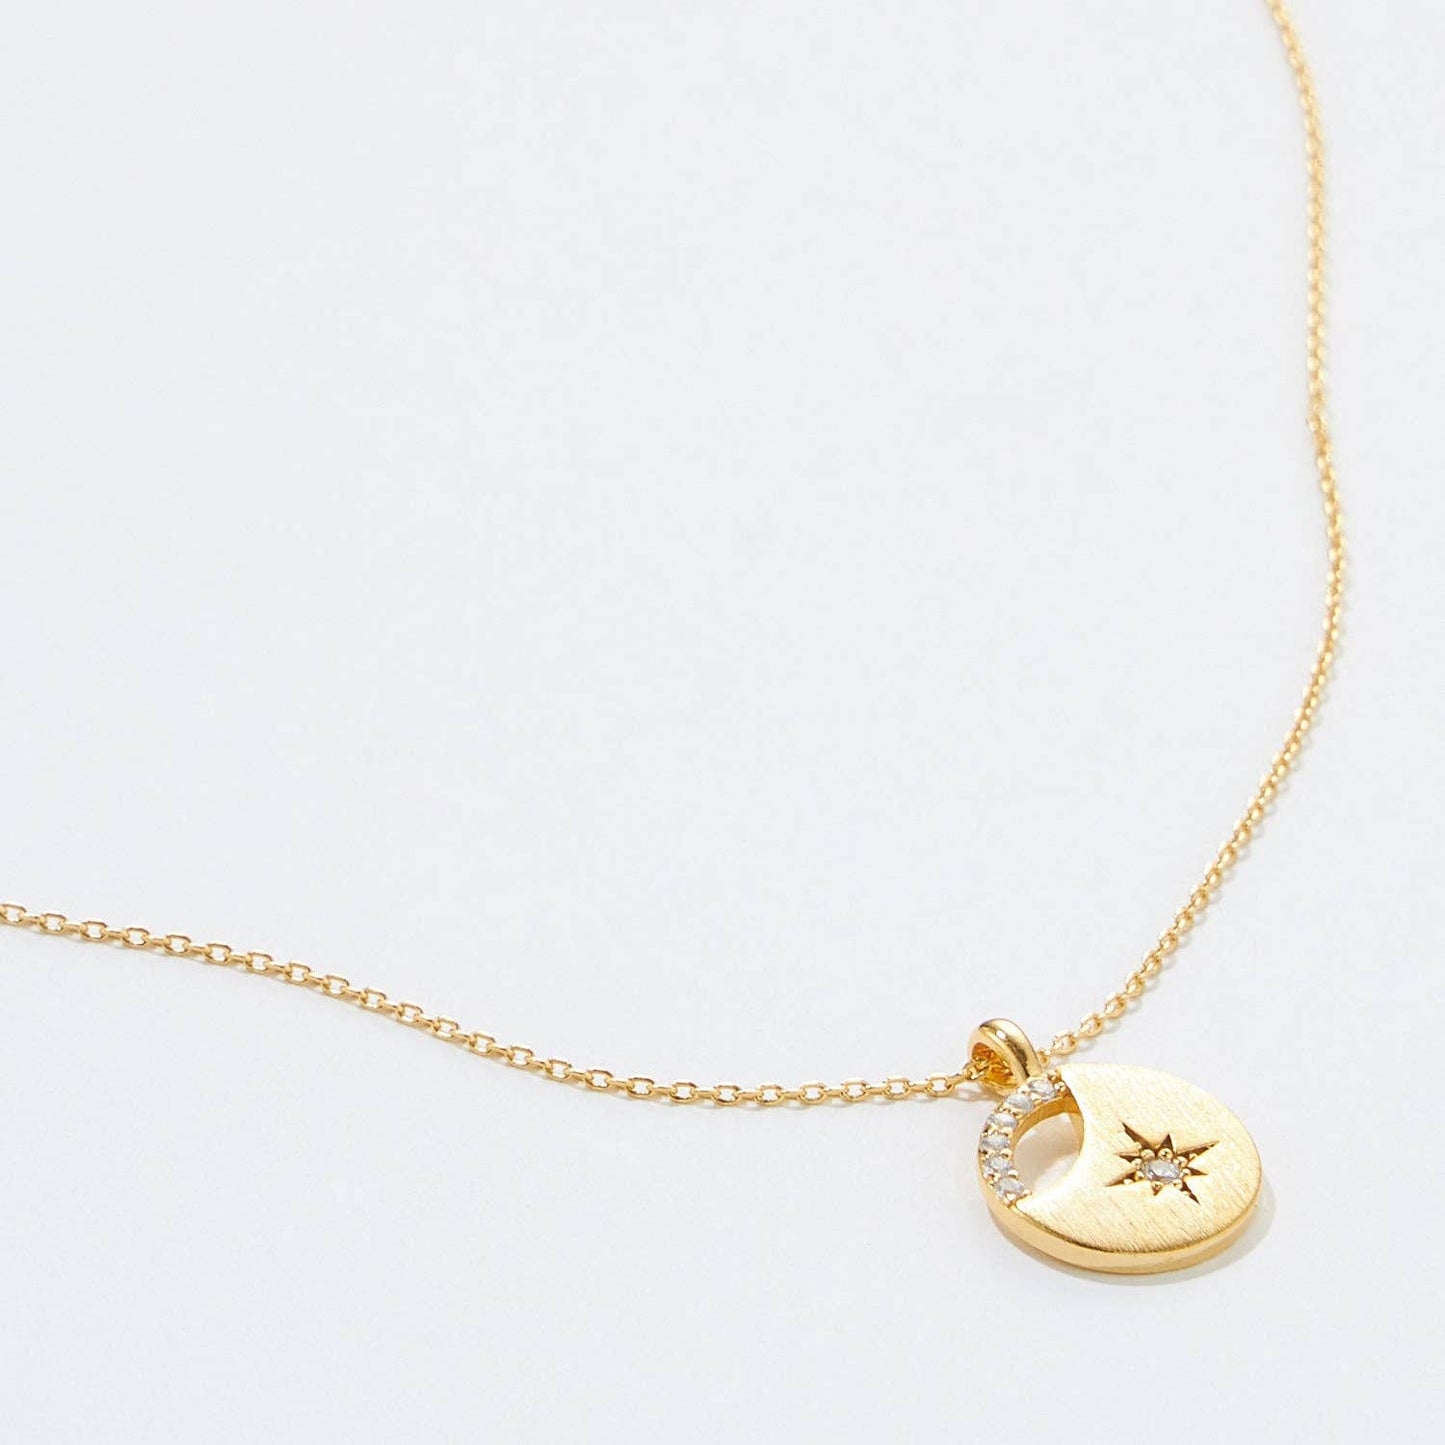 Gold Dipped Starburst Necklace